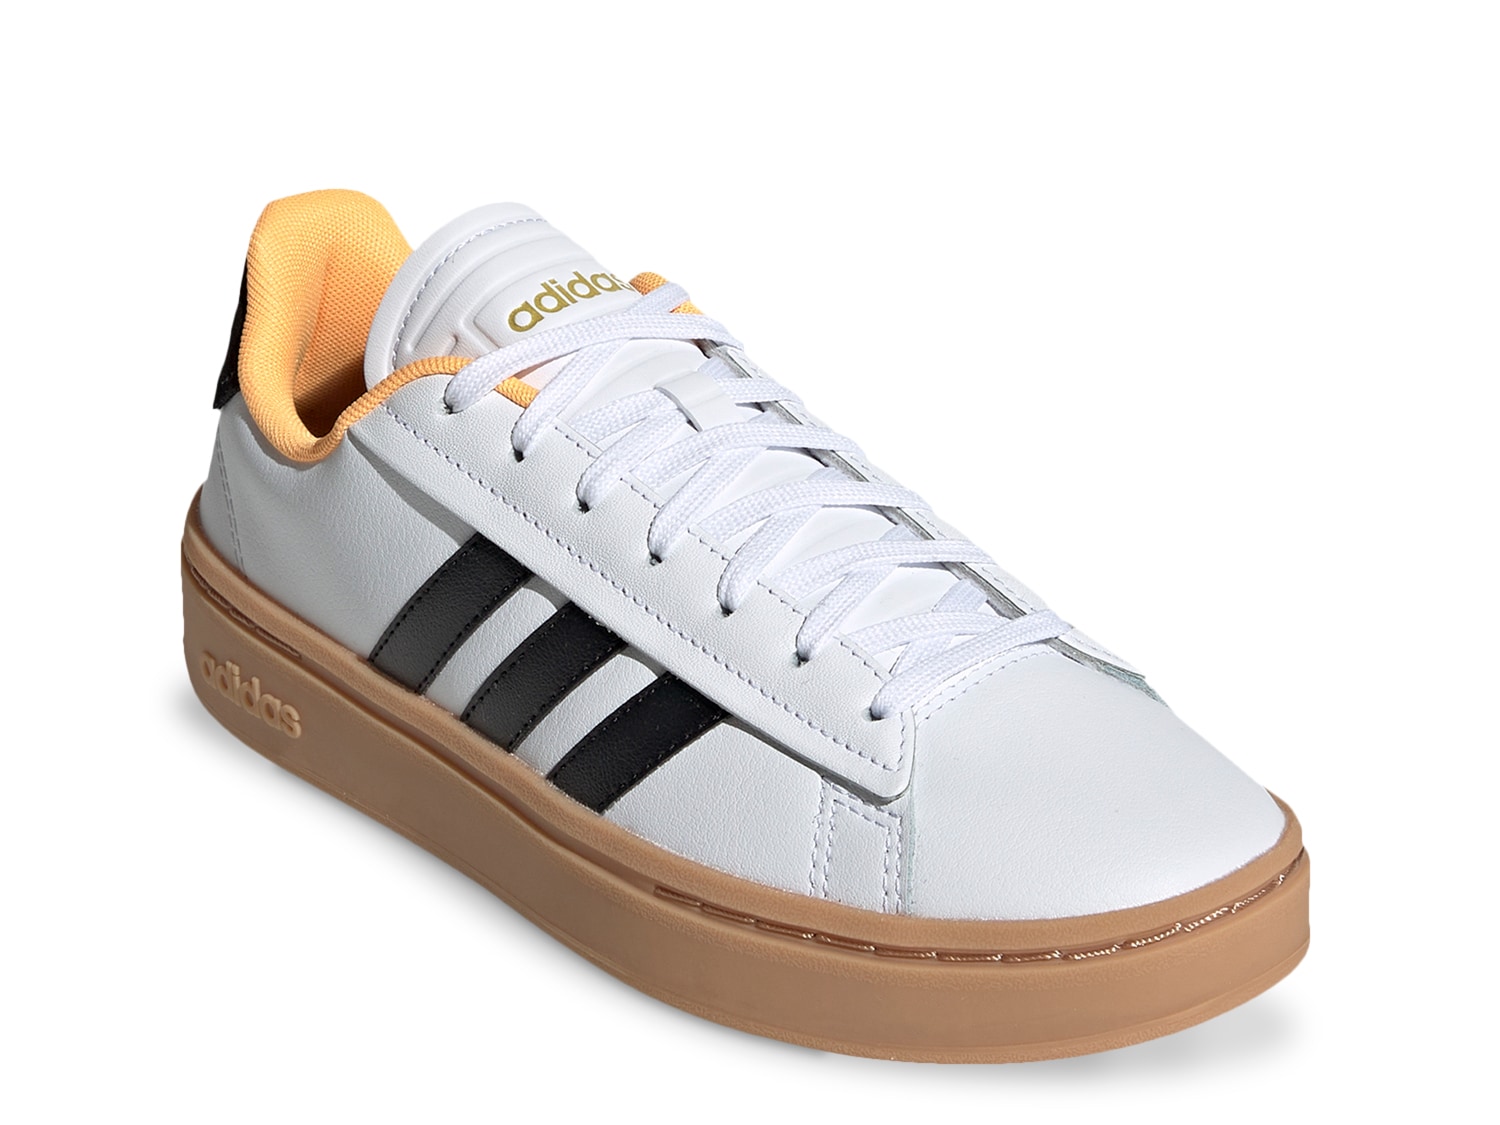 Thorny happiness barely adidas Grand Court Alpha Sneaker - Women's - Free Shipping | DSW